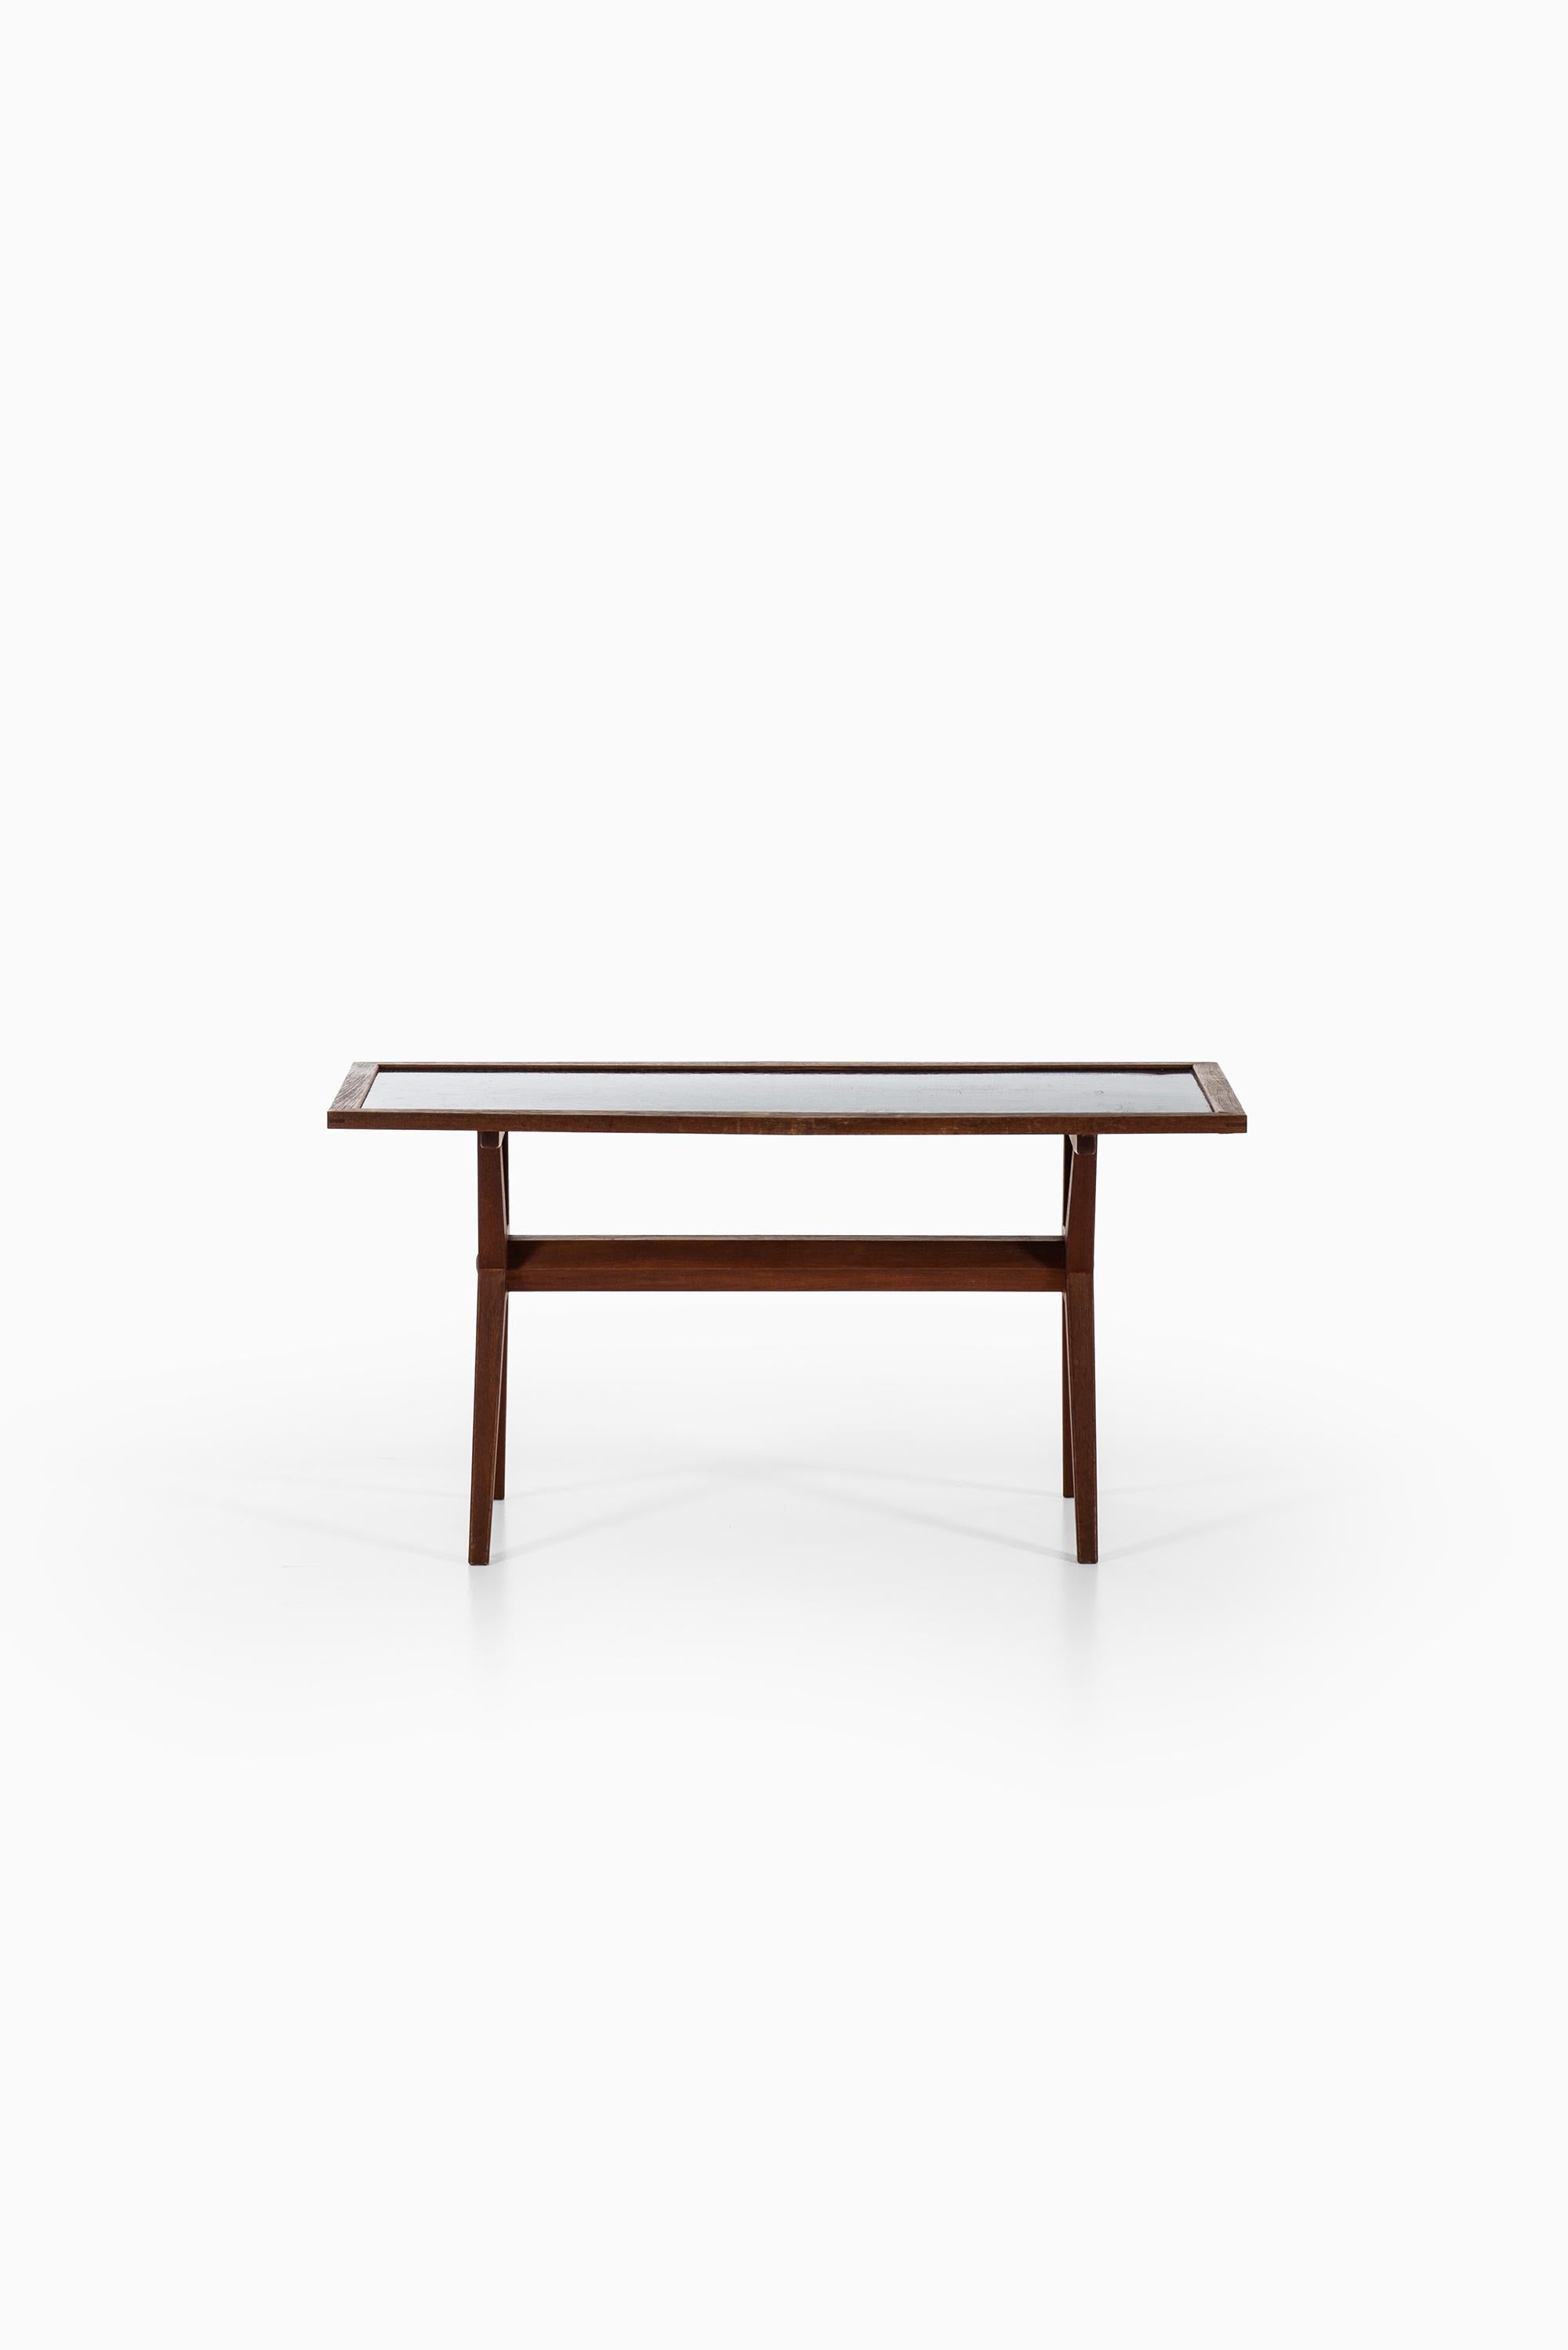 Rare coffee table designed by Stig Lindberg. Produced by Gustavsberg in Sweden.